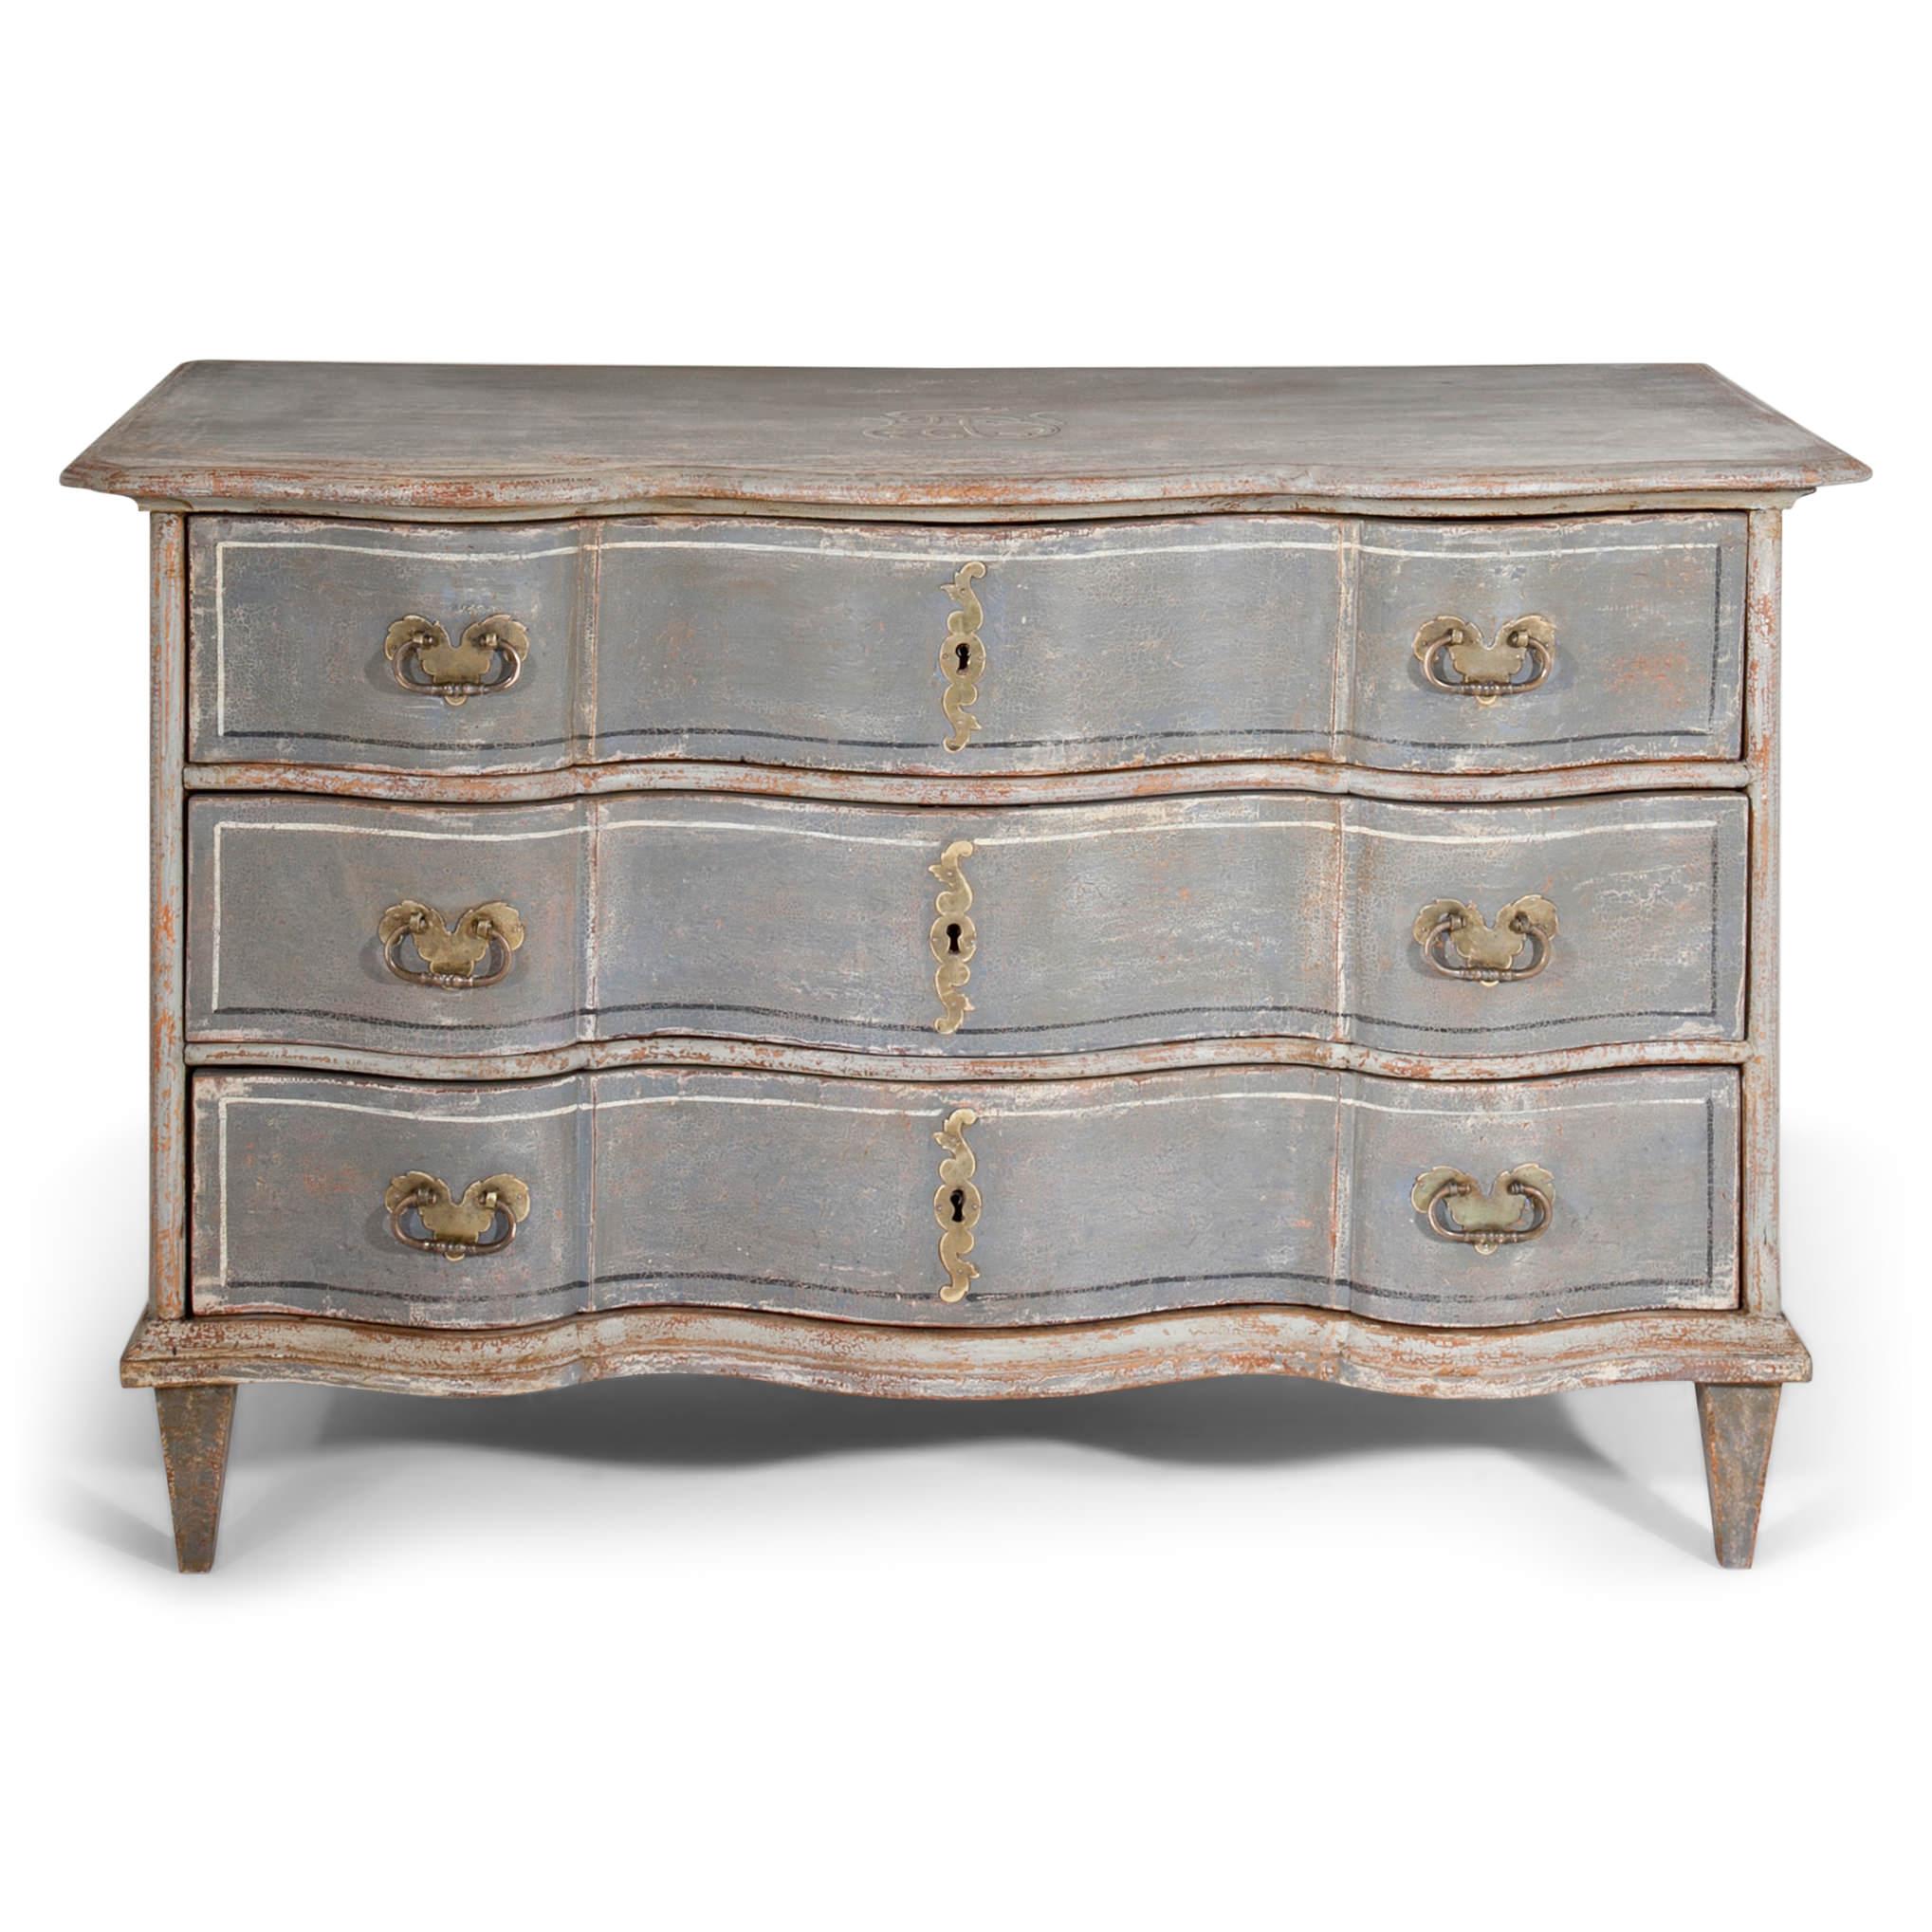 Baroque chest of drawers, standing on tapered legs. The commode has three drawers, fillings on the sides and a serpentine front. The grey-blue paint with white accents is new and inspired by historic designs. It has a distressed patina.